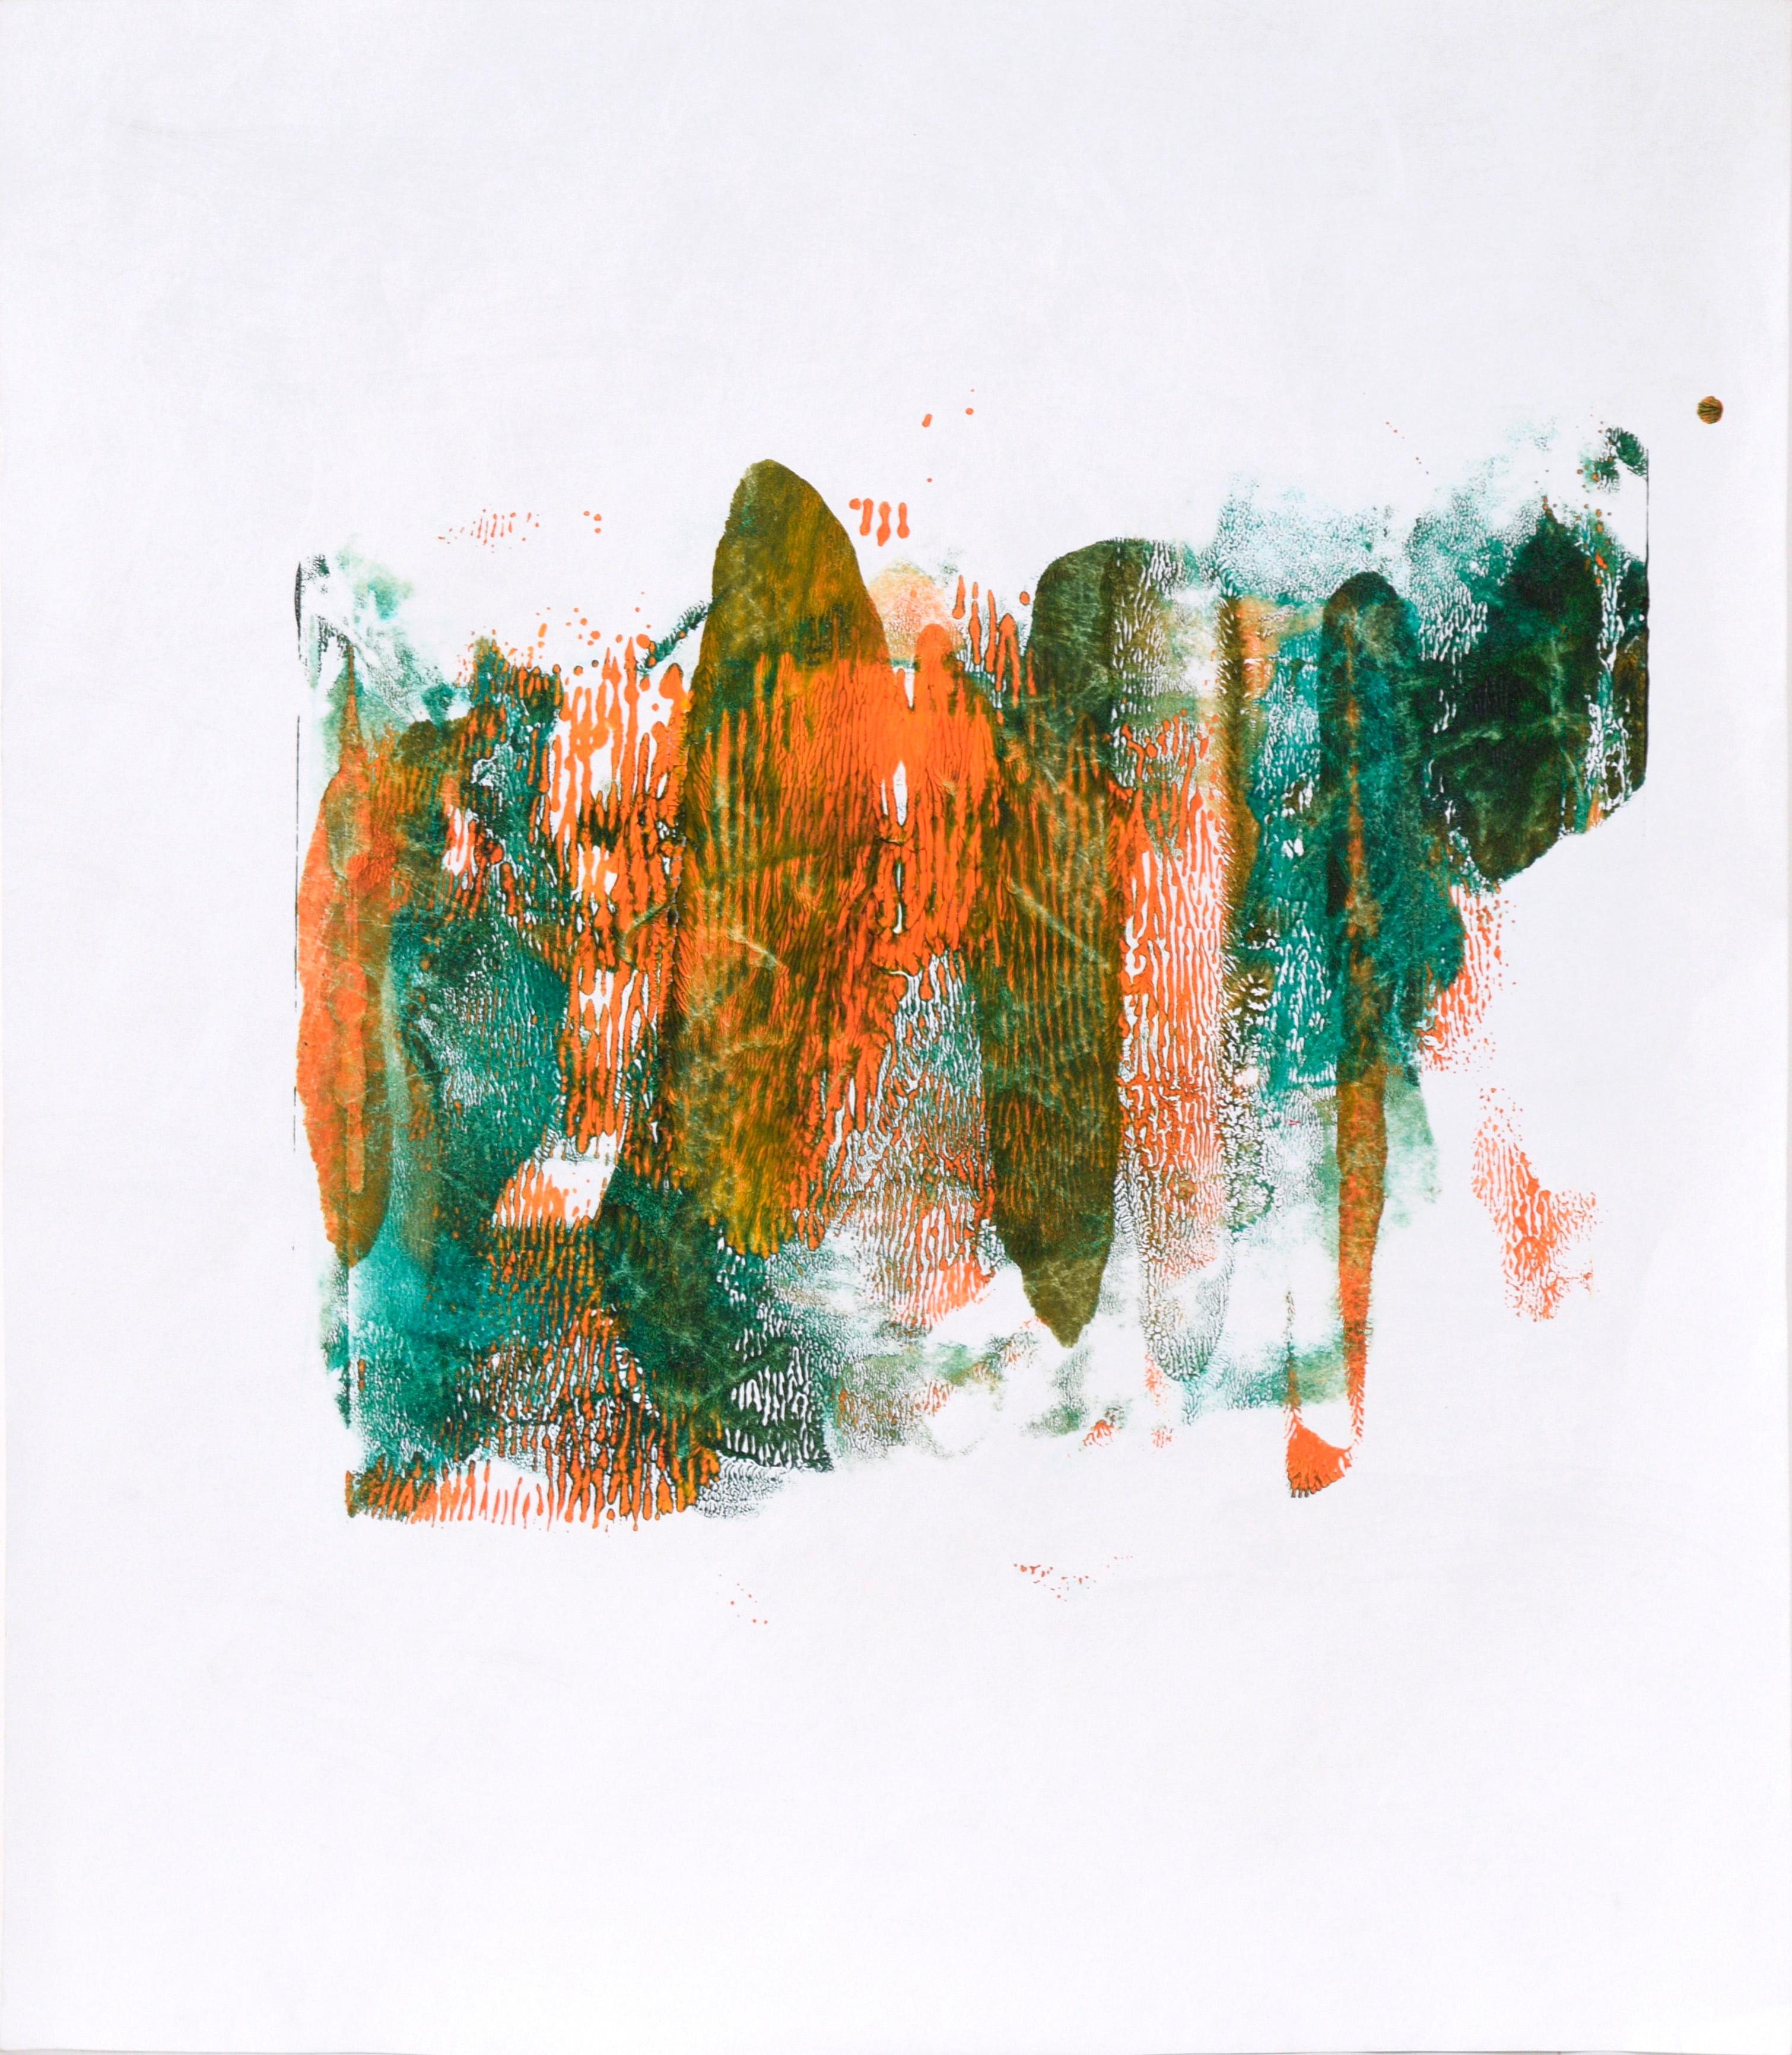 Ricardo de Silva Abstract Painting - Green and Orange Abstract Composition in Acrylic on Paper